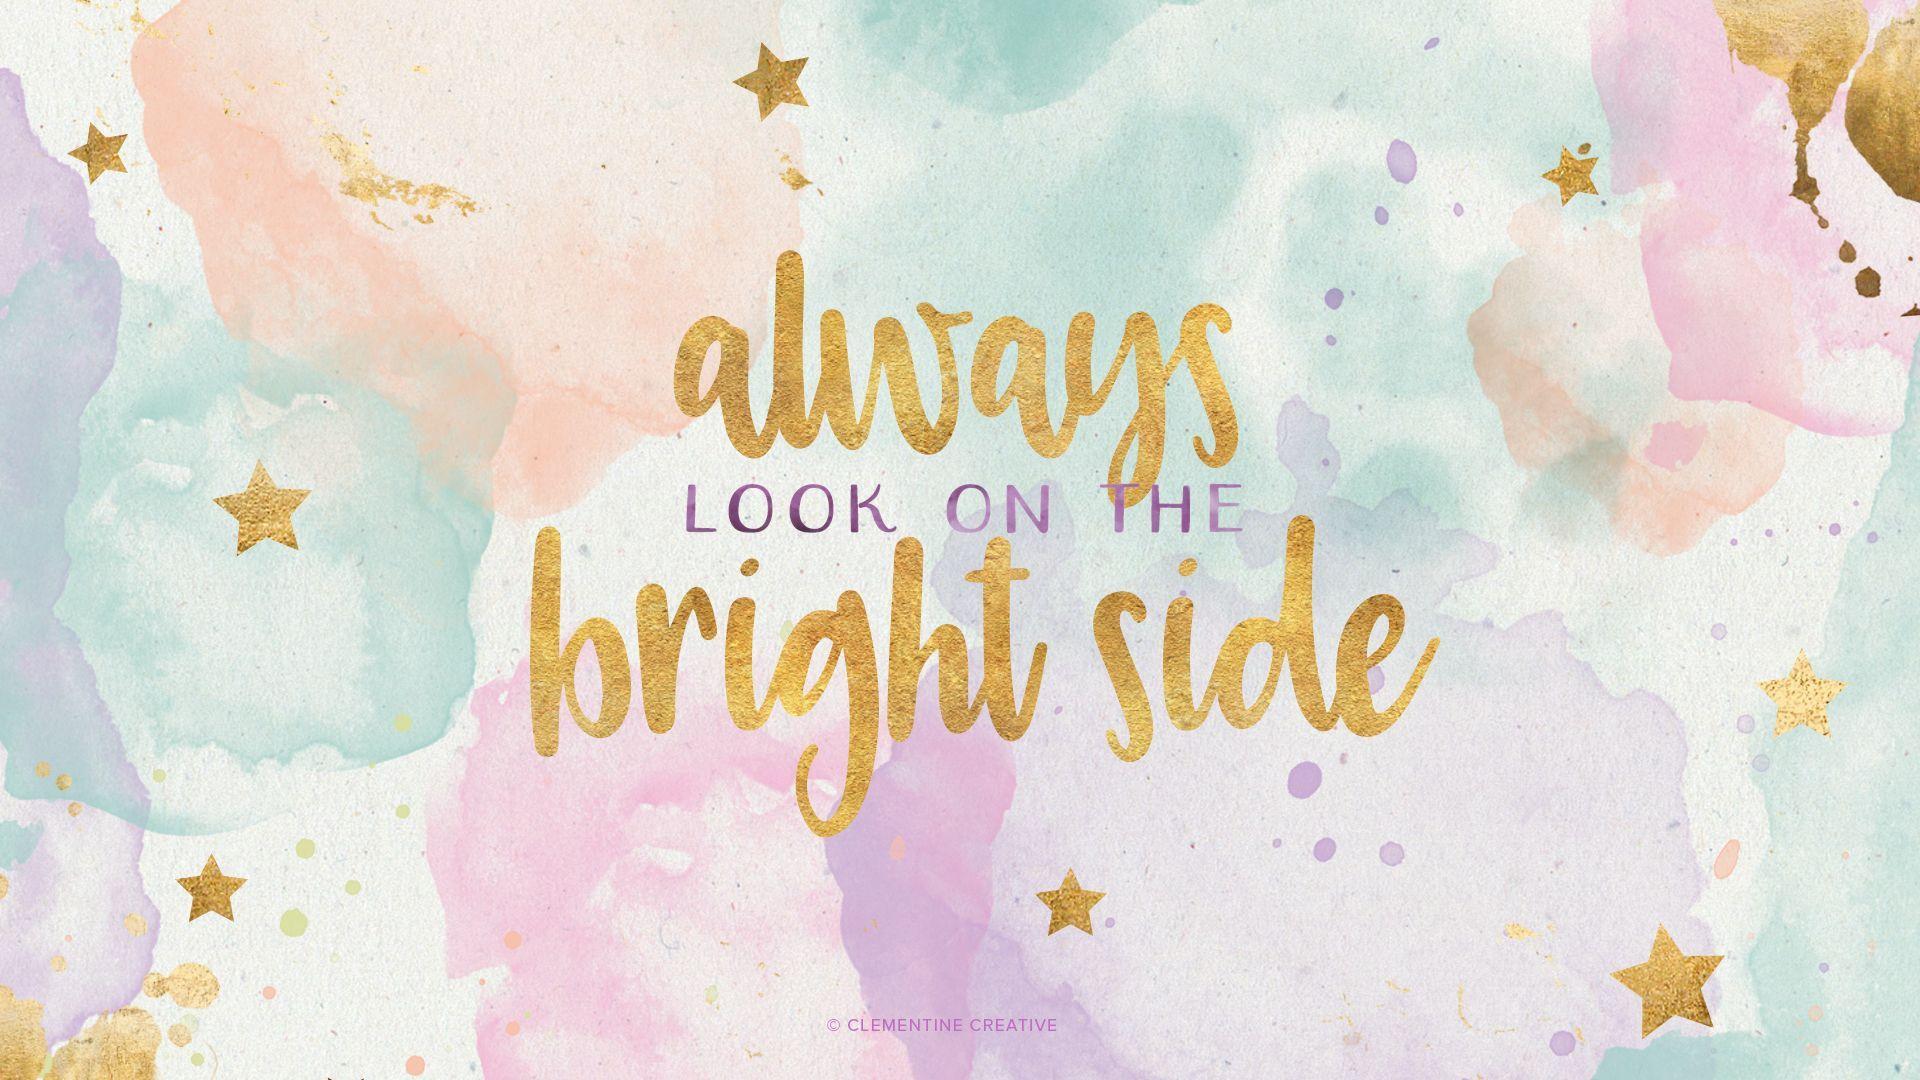 Free Wallpaper: Always Look on the Bright Side